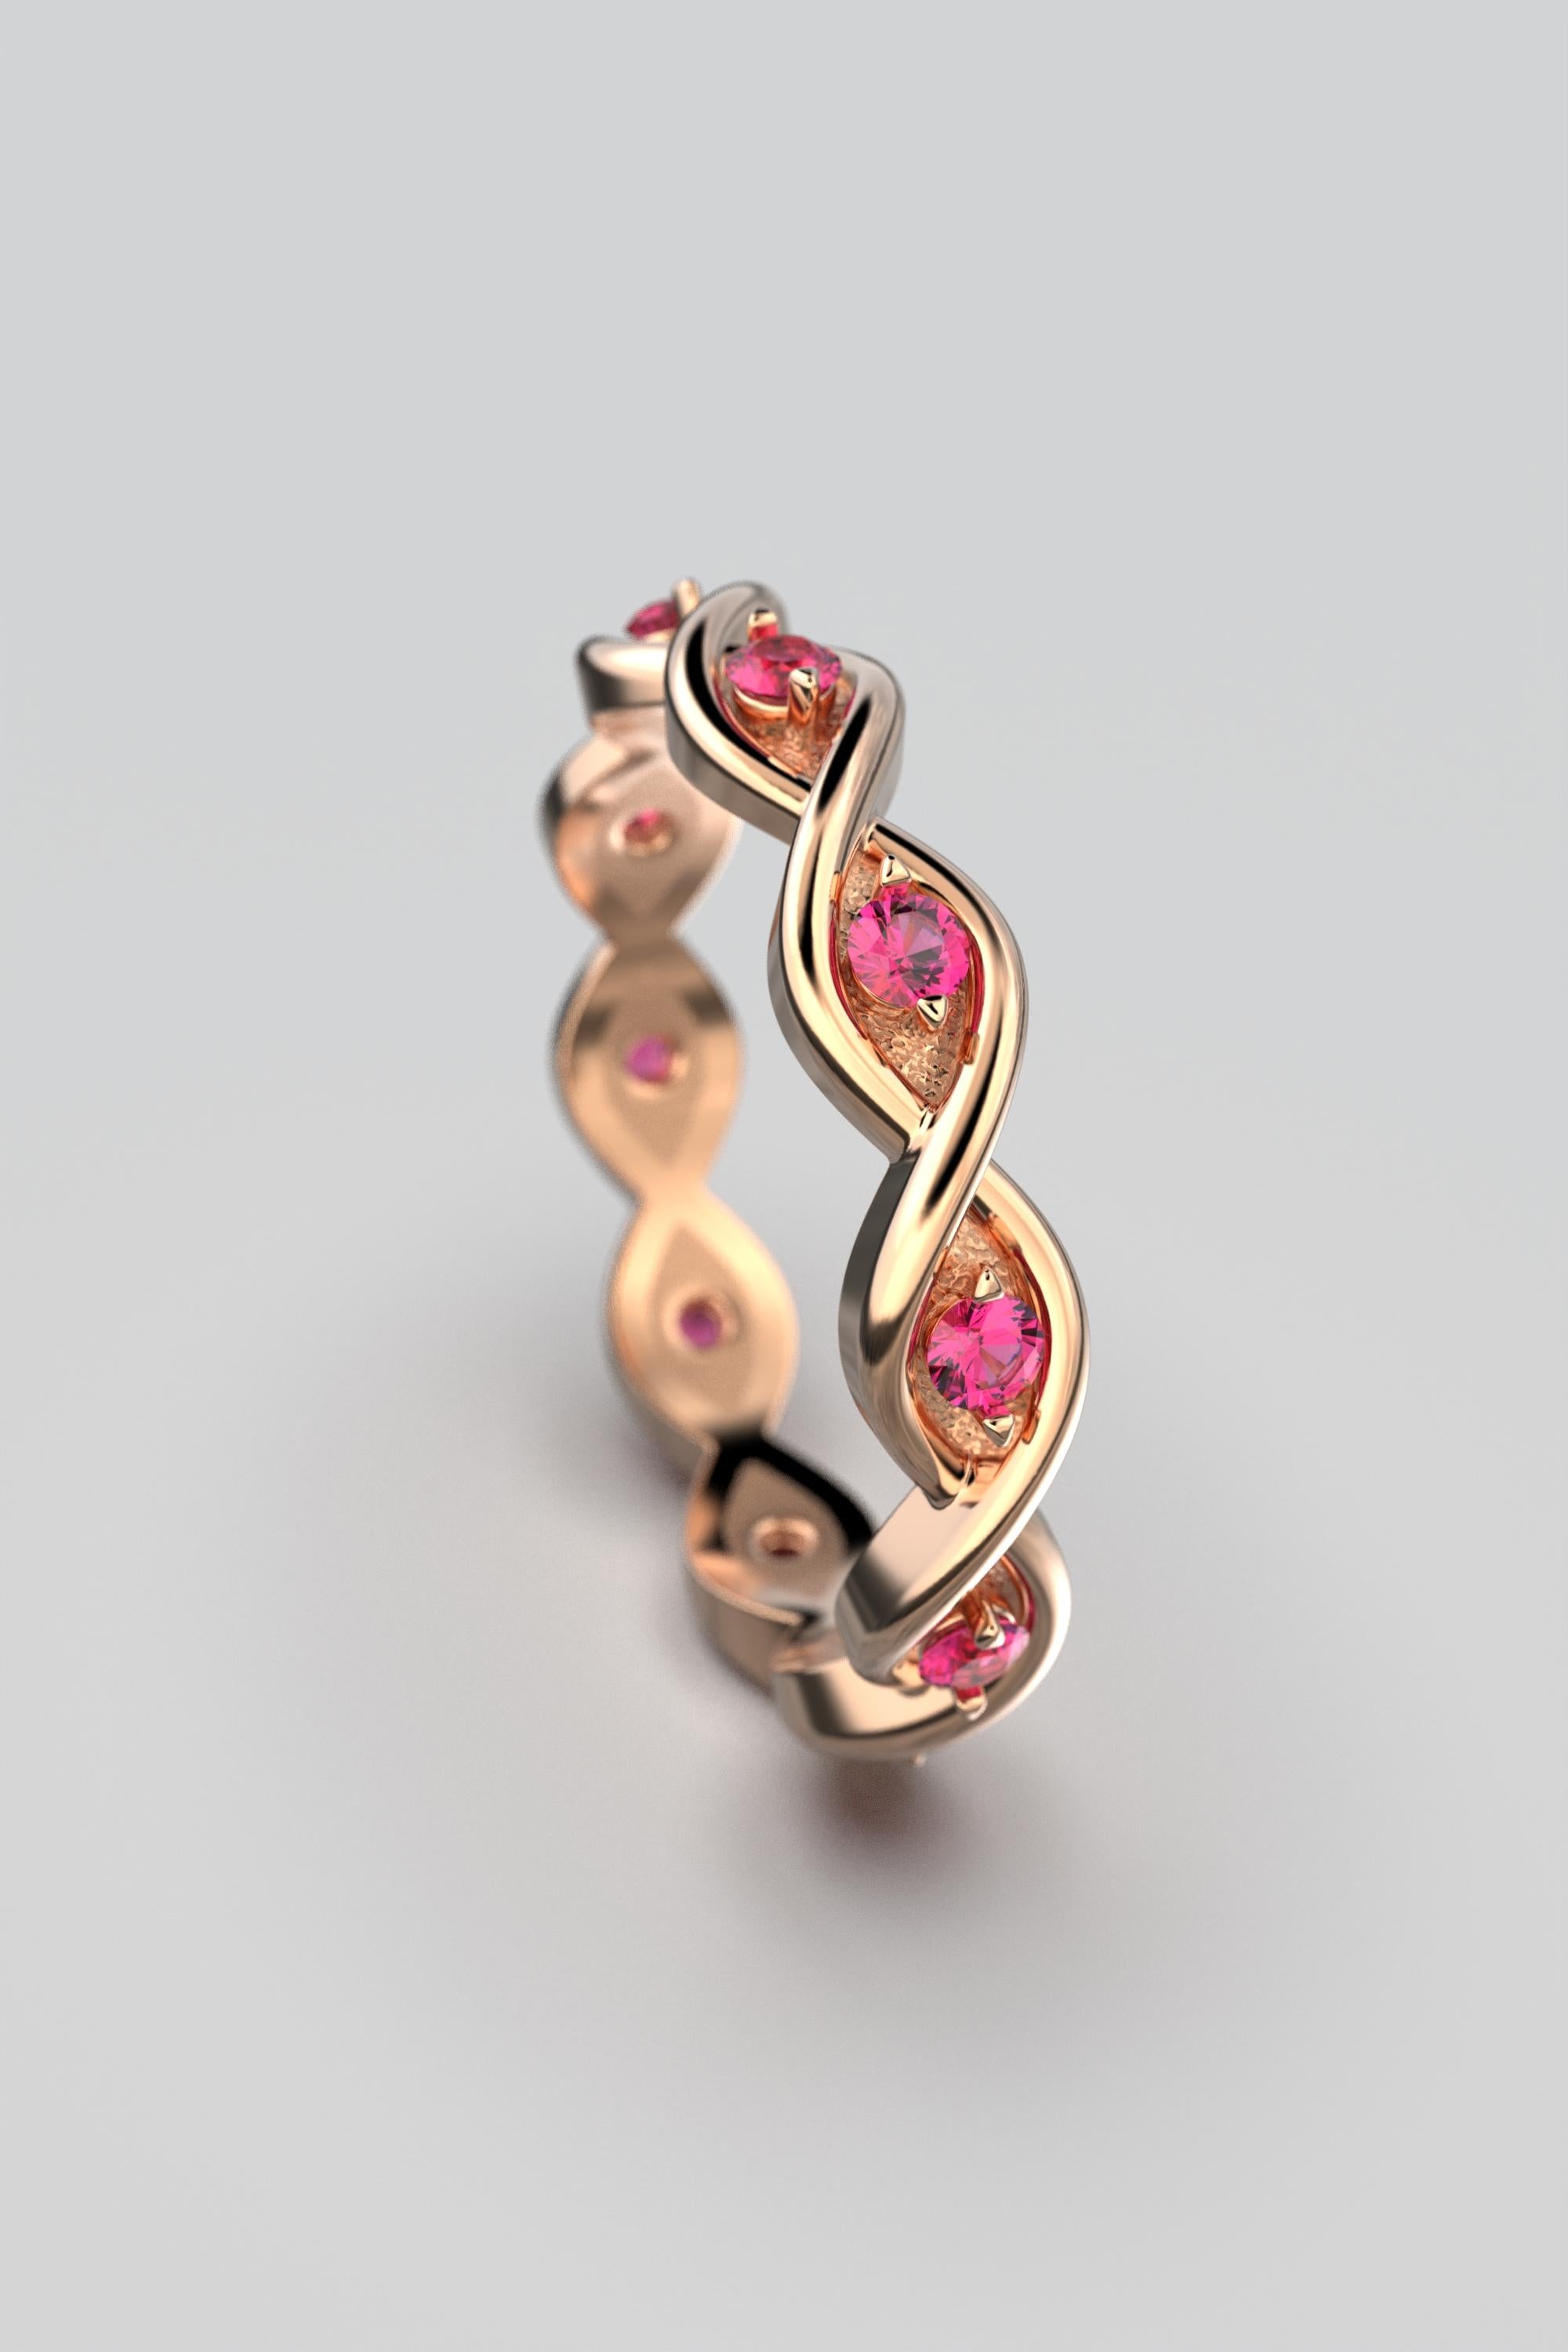 For Sale:  Eternity Ruby Band Handcrafted in Italy in 18k Solid Gold by Oltremare Gioielli 5